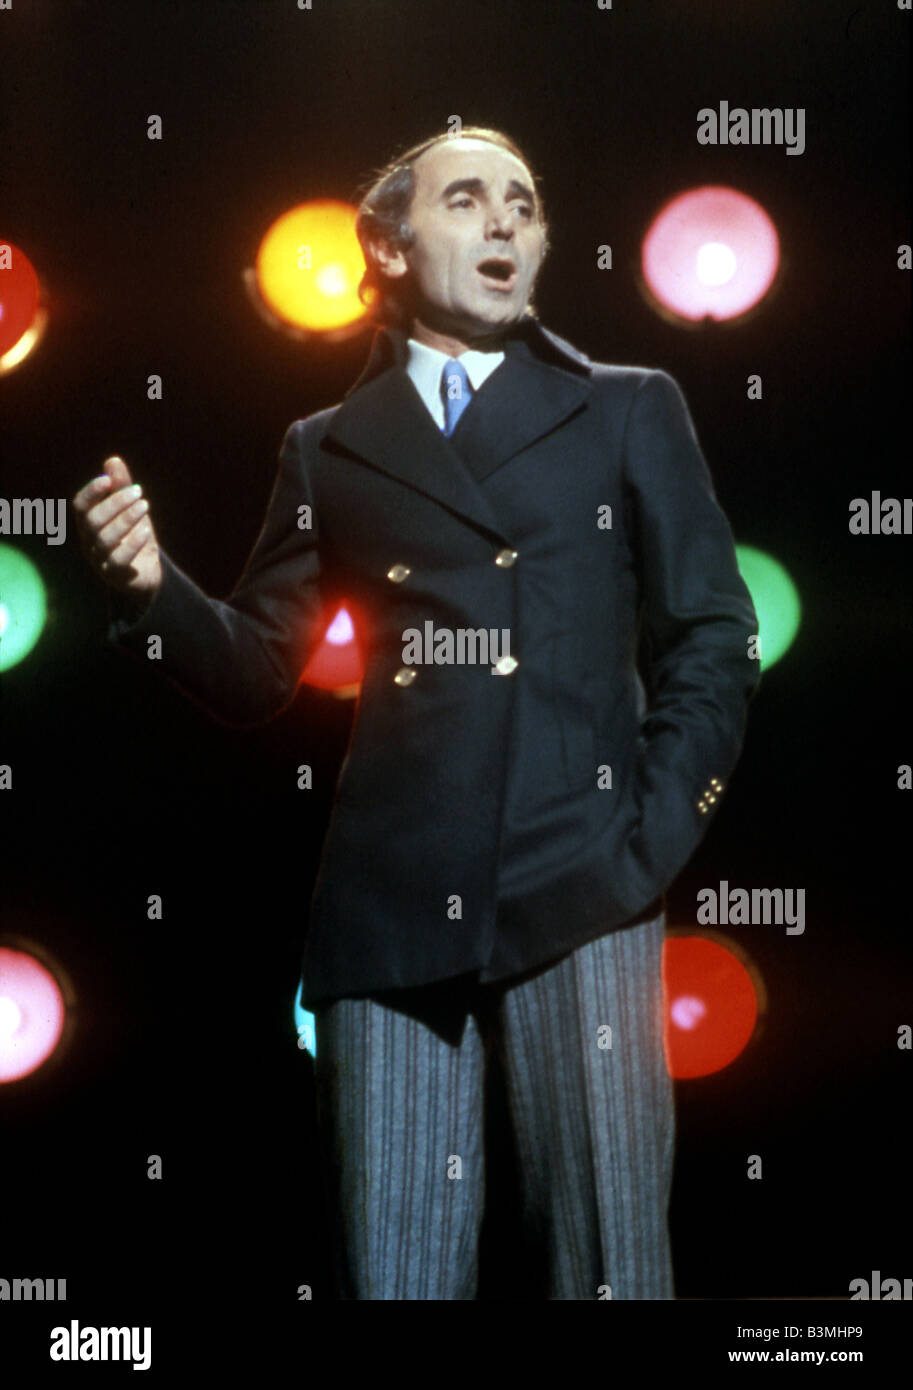 CHARLES AZNAVOUR cantante francese nel 1973 Foto Stock